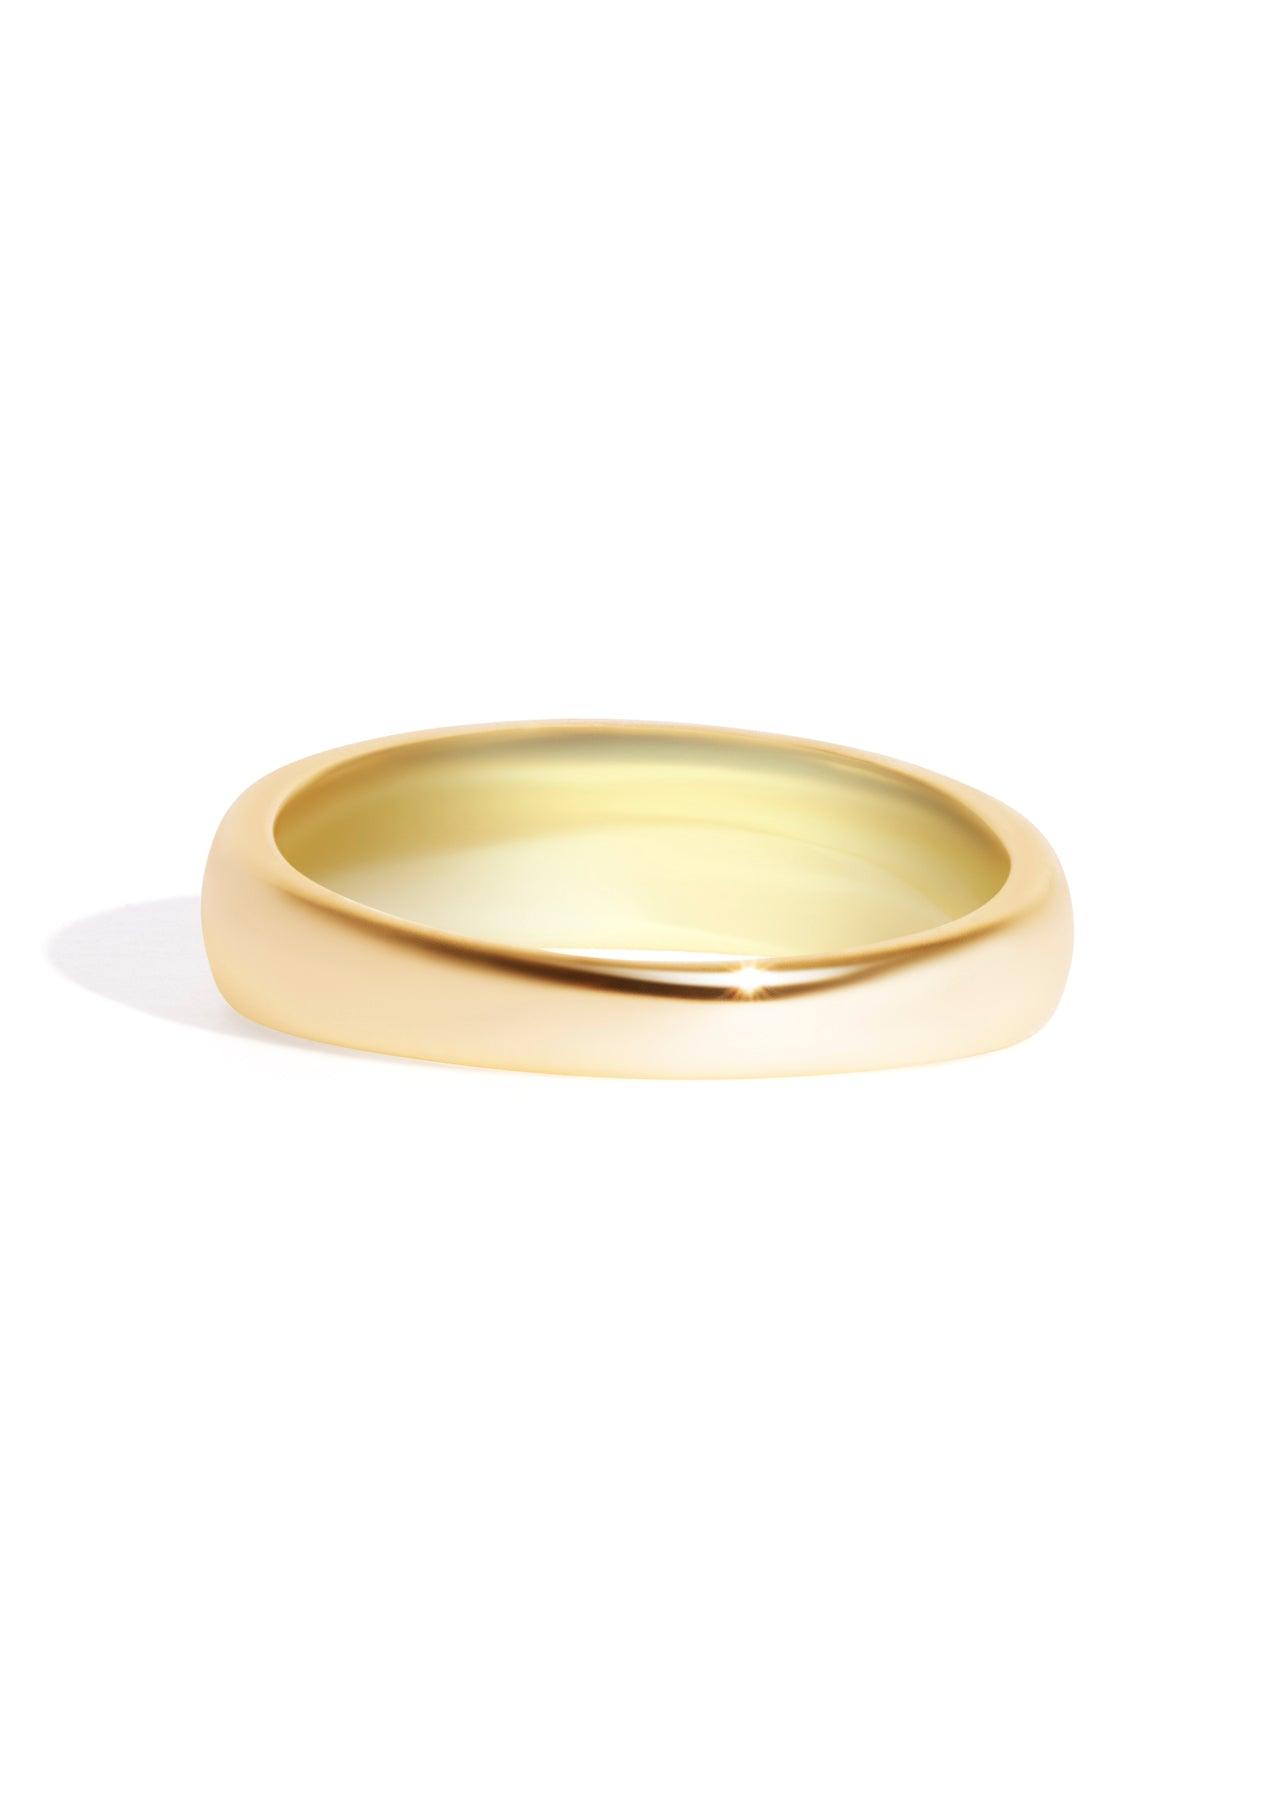 The To The Moon Pearl 14ct Gold Vermeil Signet Ring - Molten Store